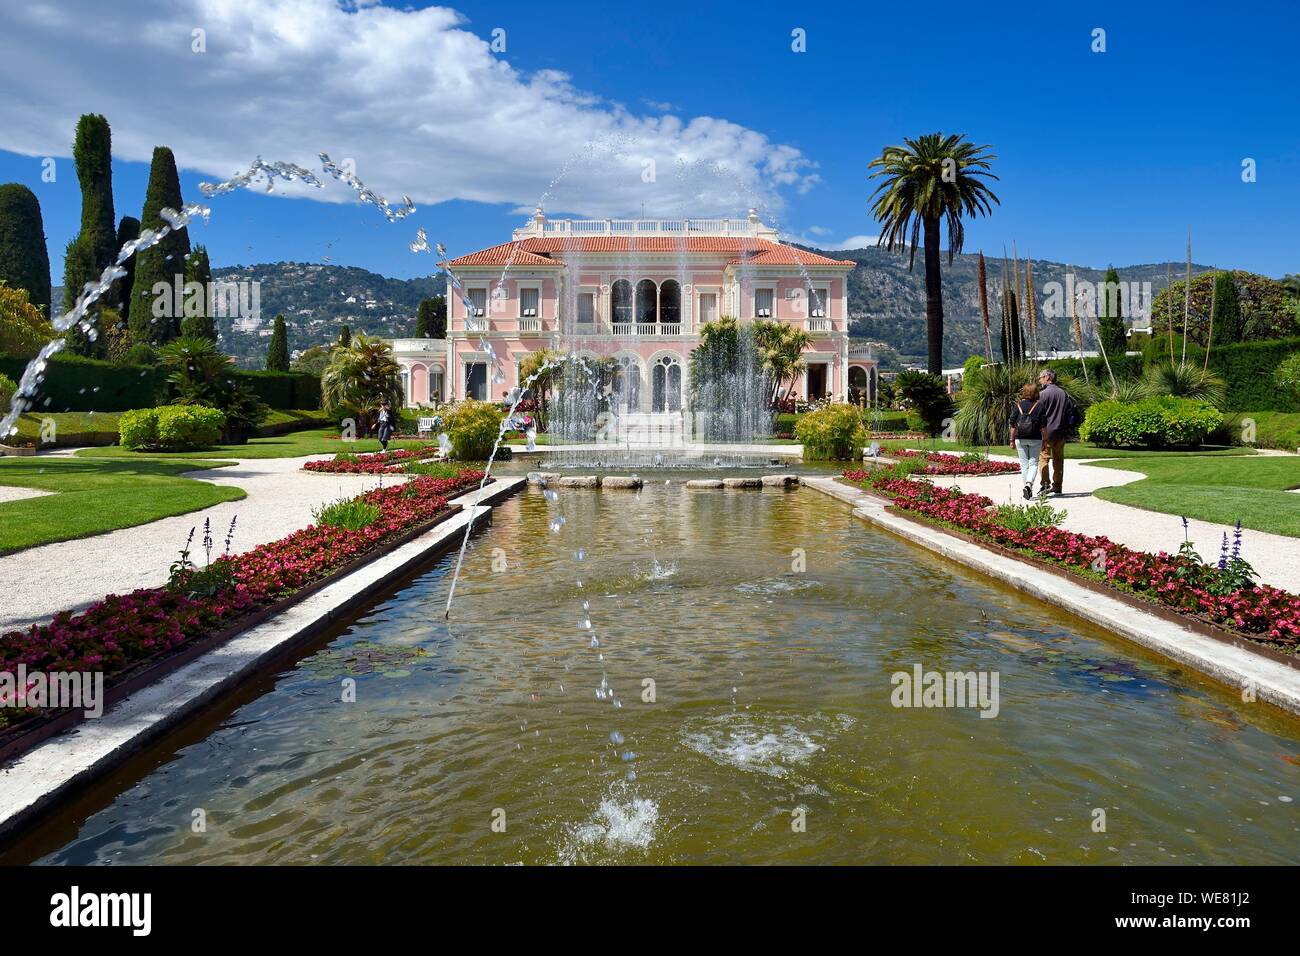 France, Alpes Maritimes, Saint Jean Cap Ferrat, Ephrussi de Rothschild villa and garden, large pond and water jets in the French garden Stock Photo